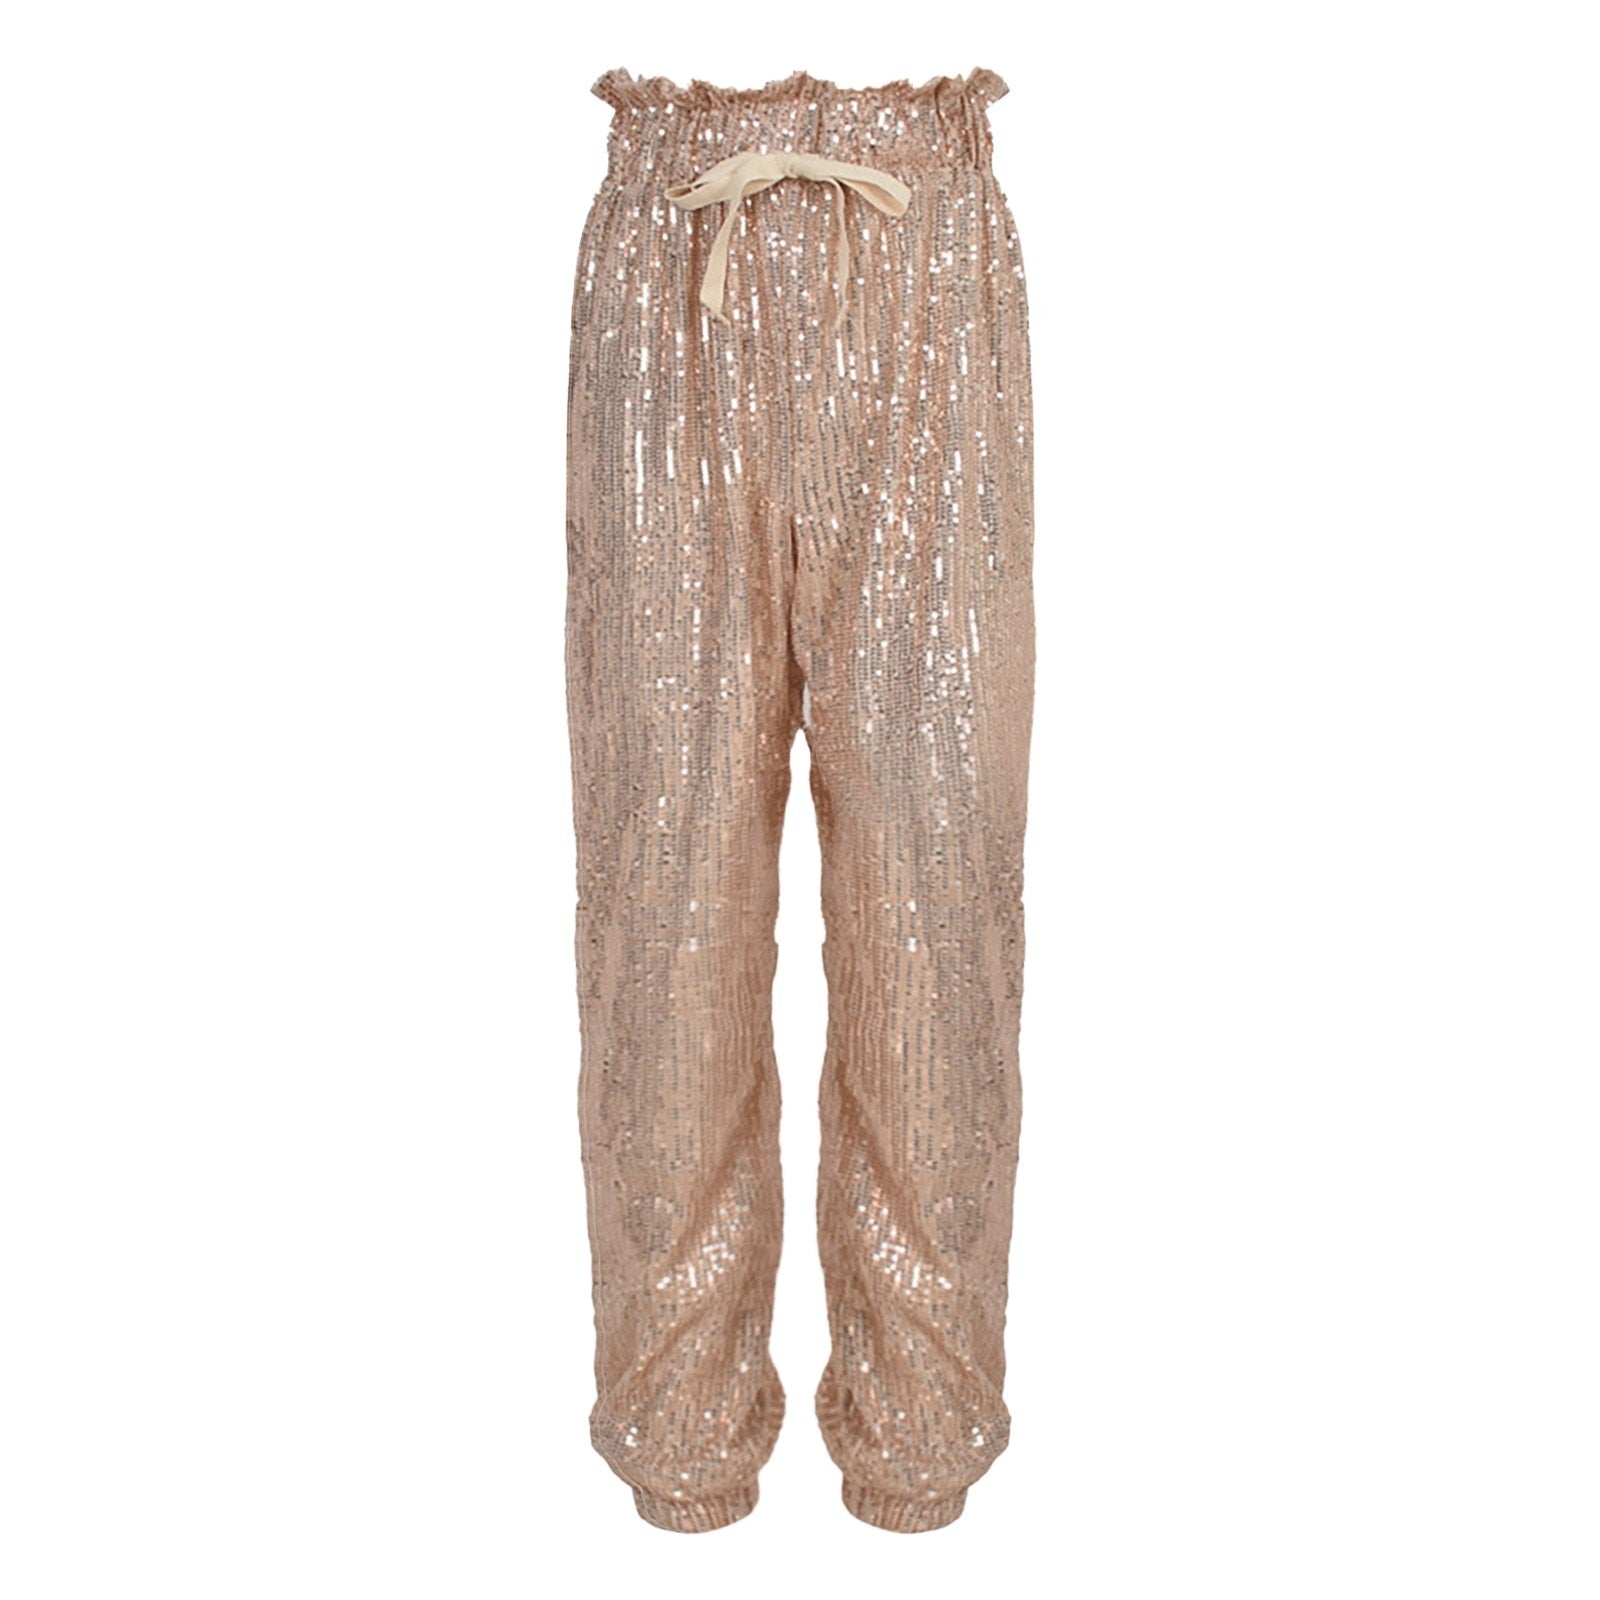 Sequin High Waisted Slit Pants Rose Gold - Southern Fashion Boutique Bliss